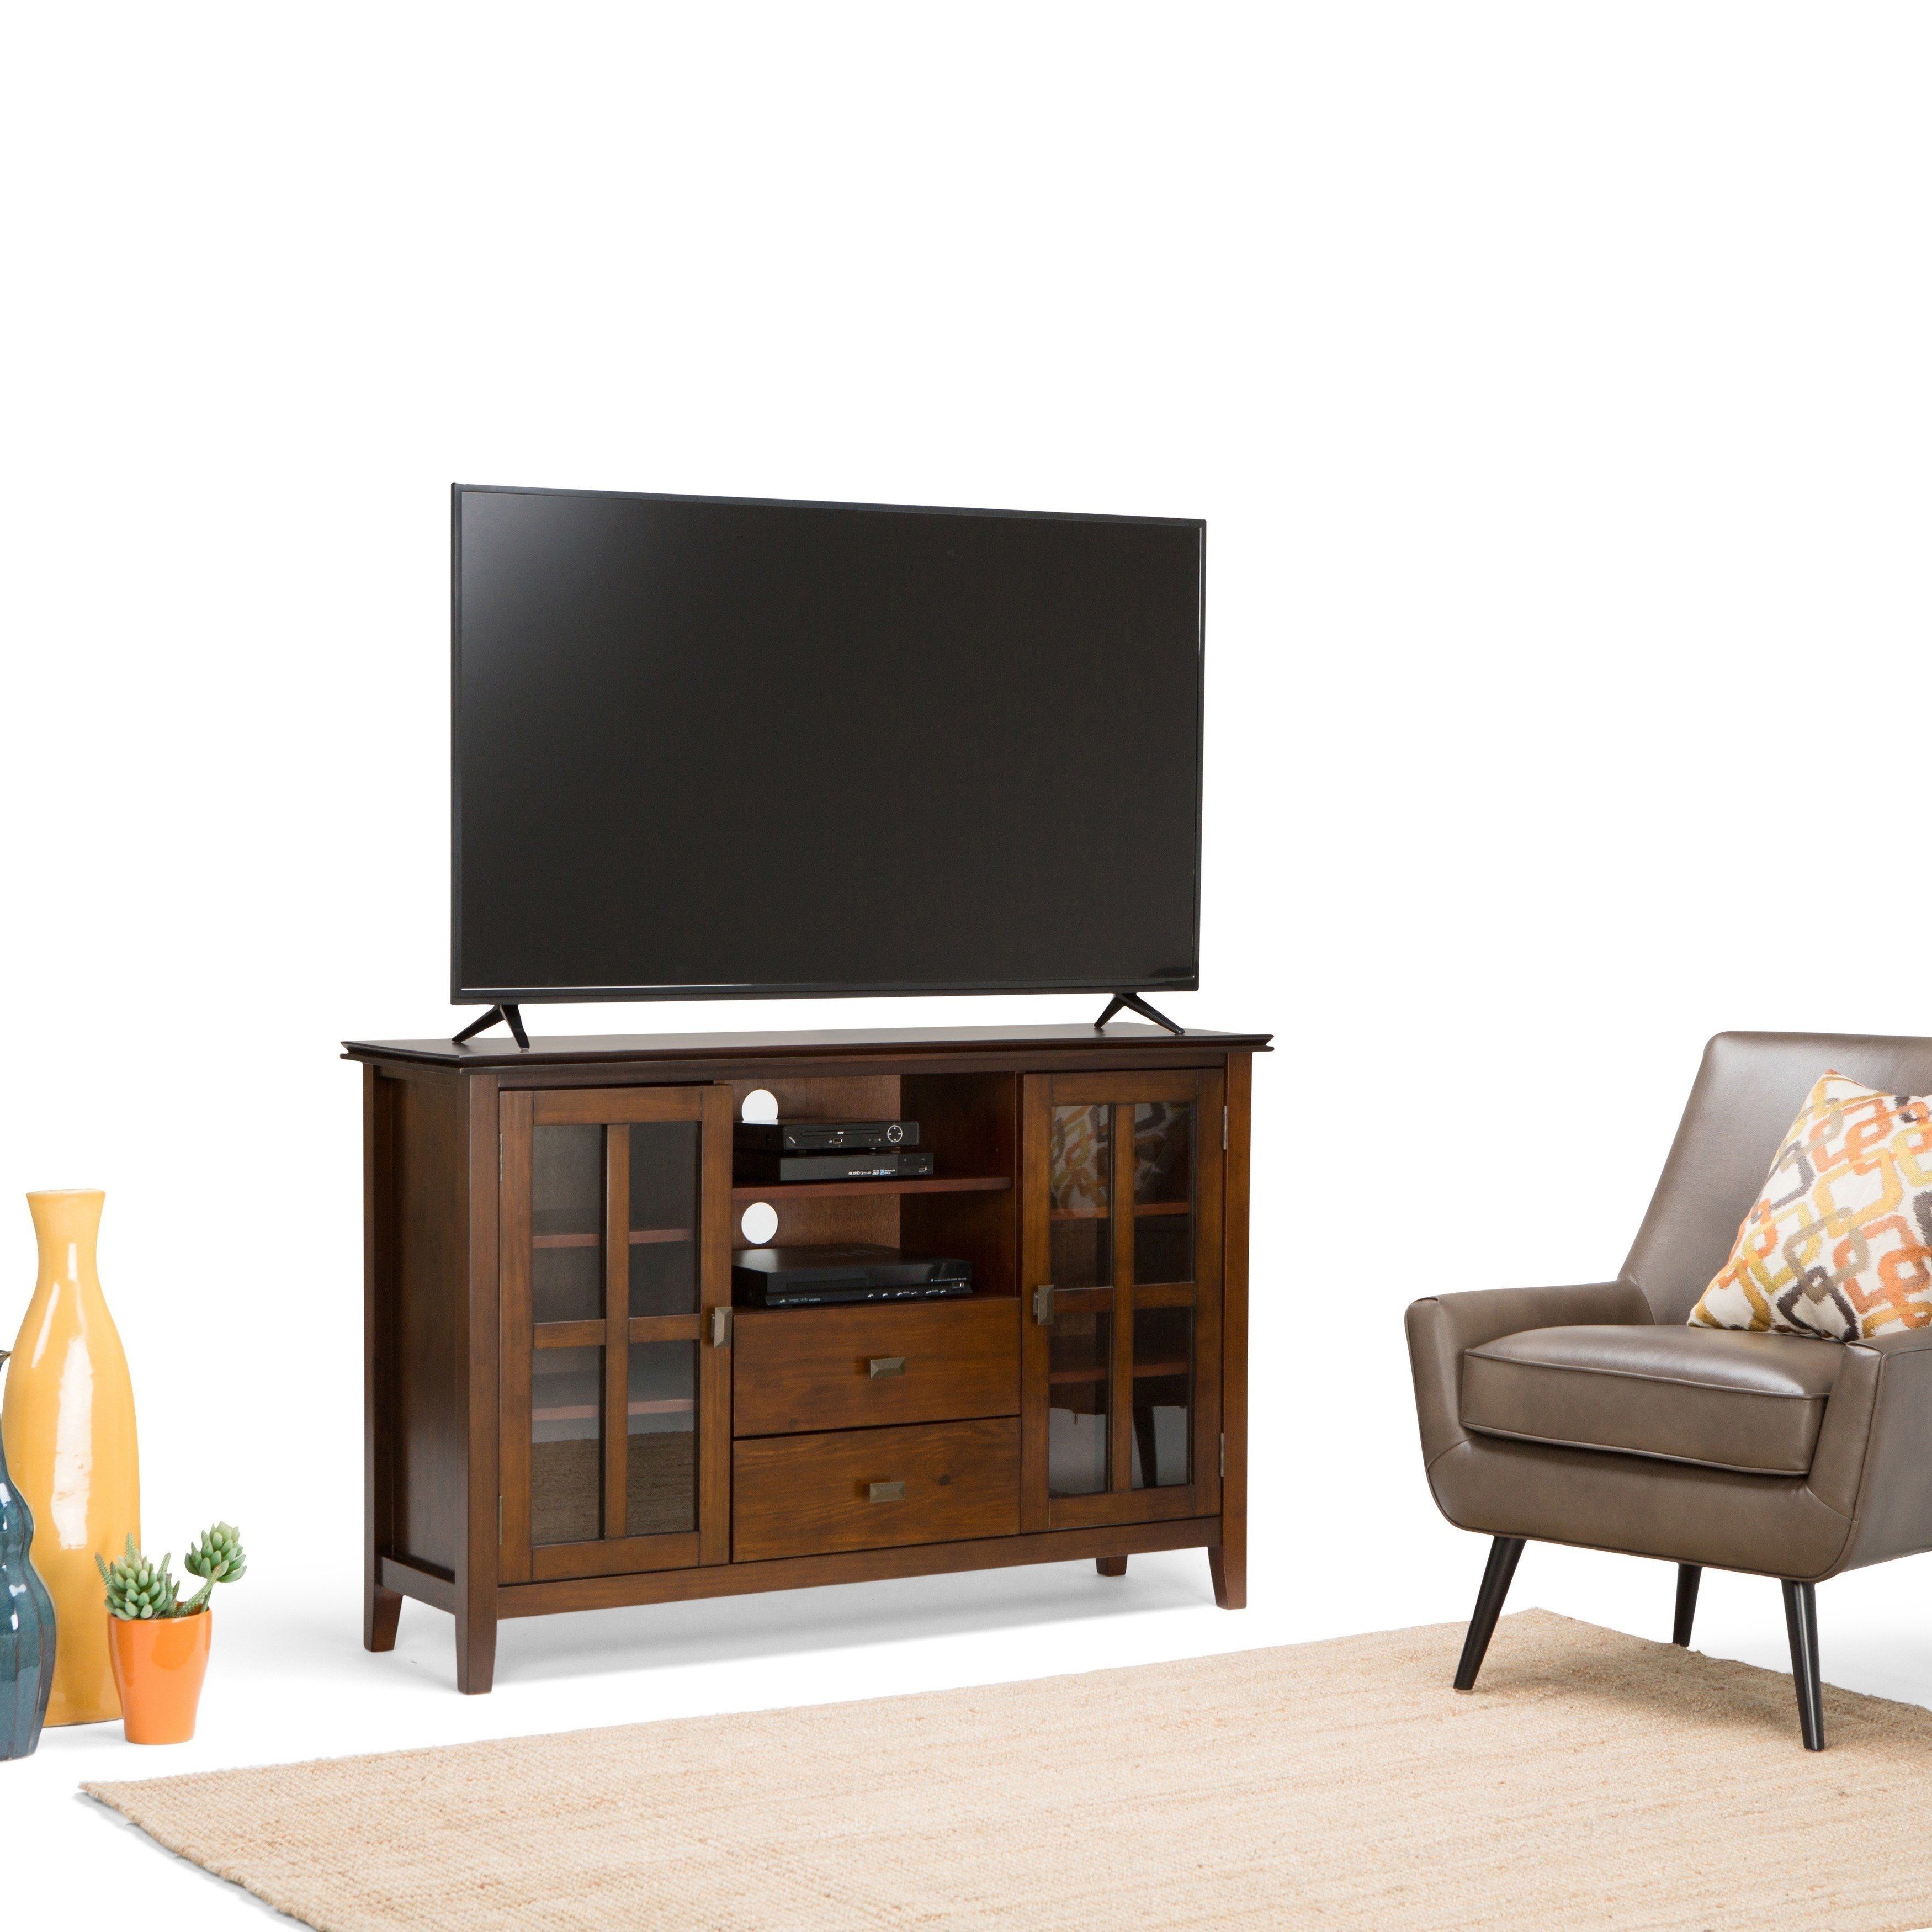 Shop Wyndenhall Stratford Tall Tv Stand For Tv's Up To 60 Inches With Regard To Century Blue 60 Inch Tv Stands (View 3 of 30)